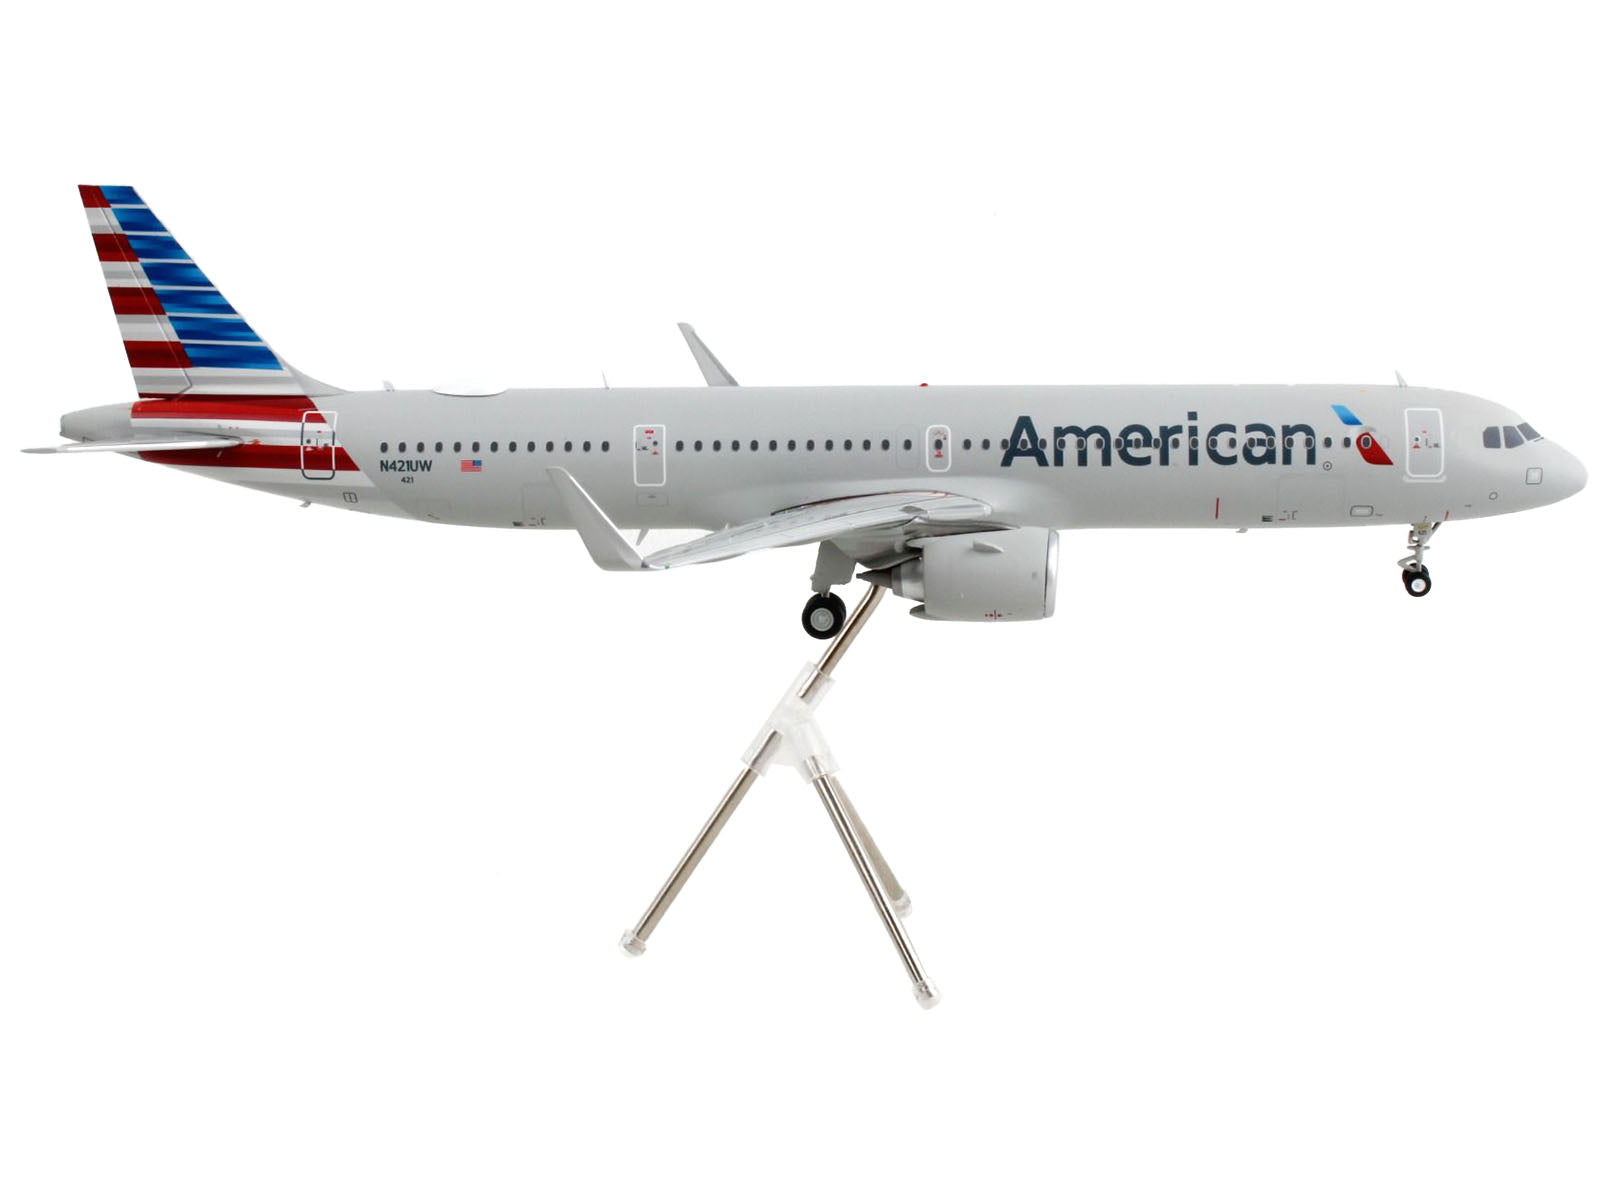 Airbus A321neo Commercial Aircraft "American Airlines" Silver with Striped Tail "Gemini 200" Series 1/200 Diecast Model Airplane by GeminiJets